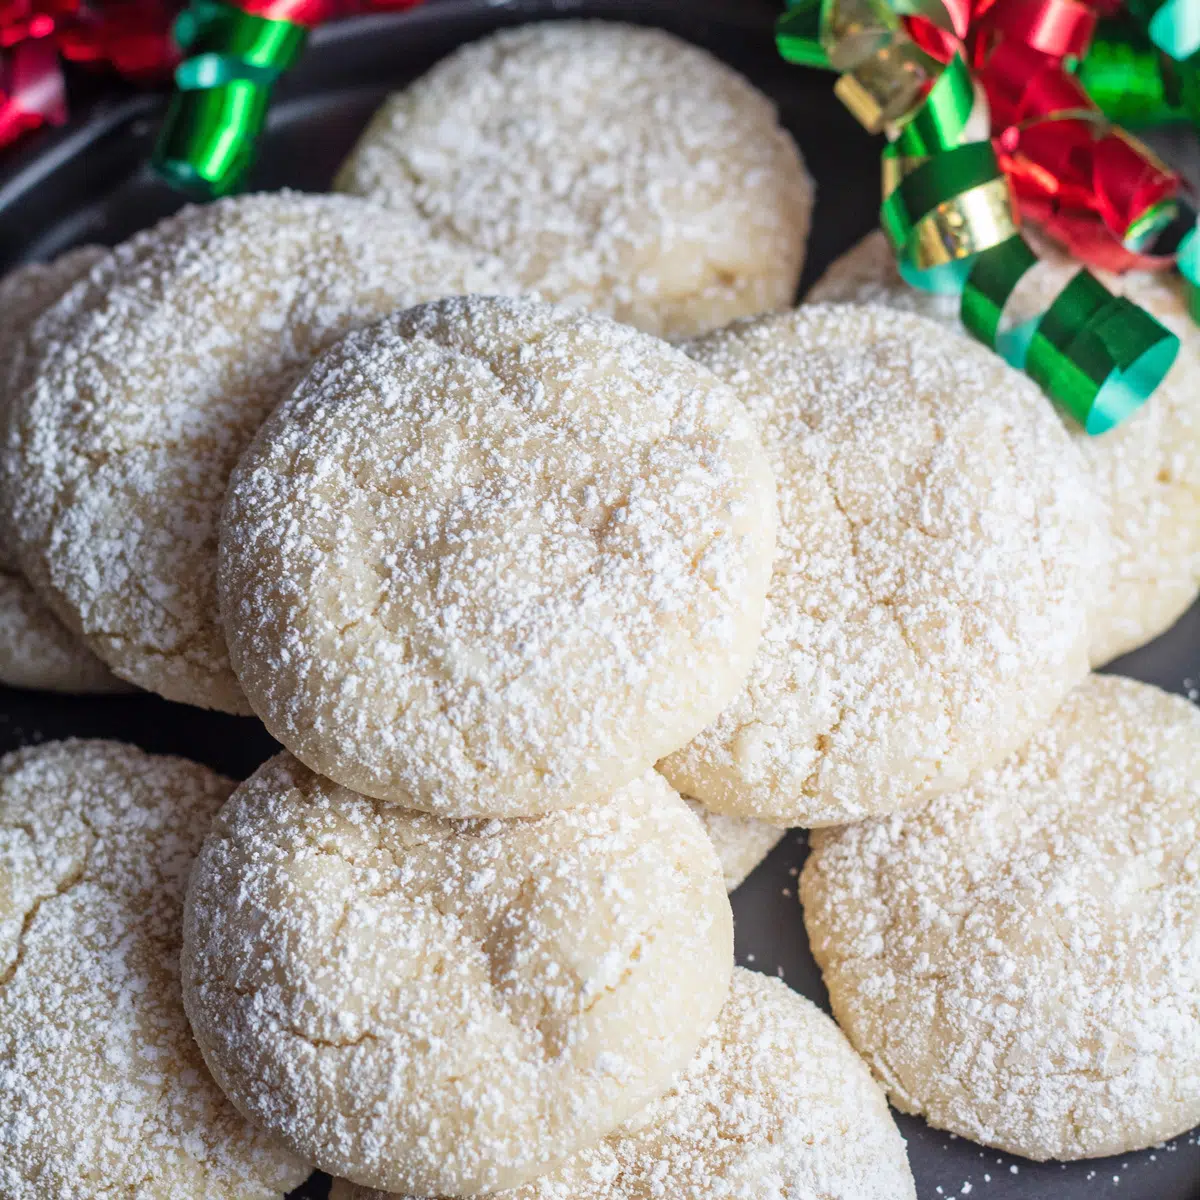 Confectioners' suagr dusted vanilla crinkle cookies with holiday ribbons in background.